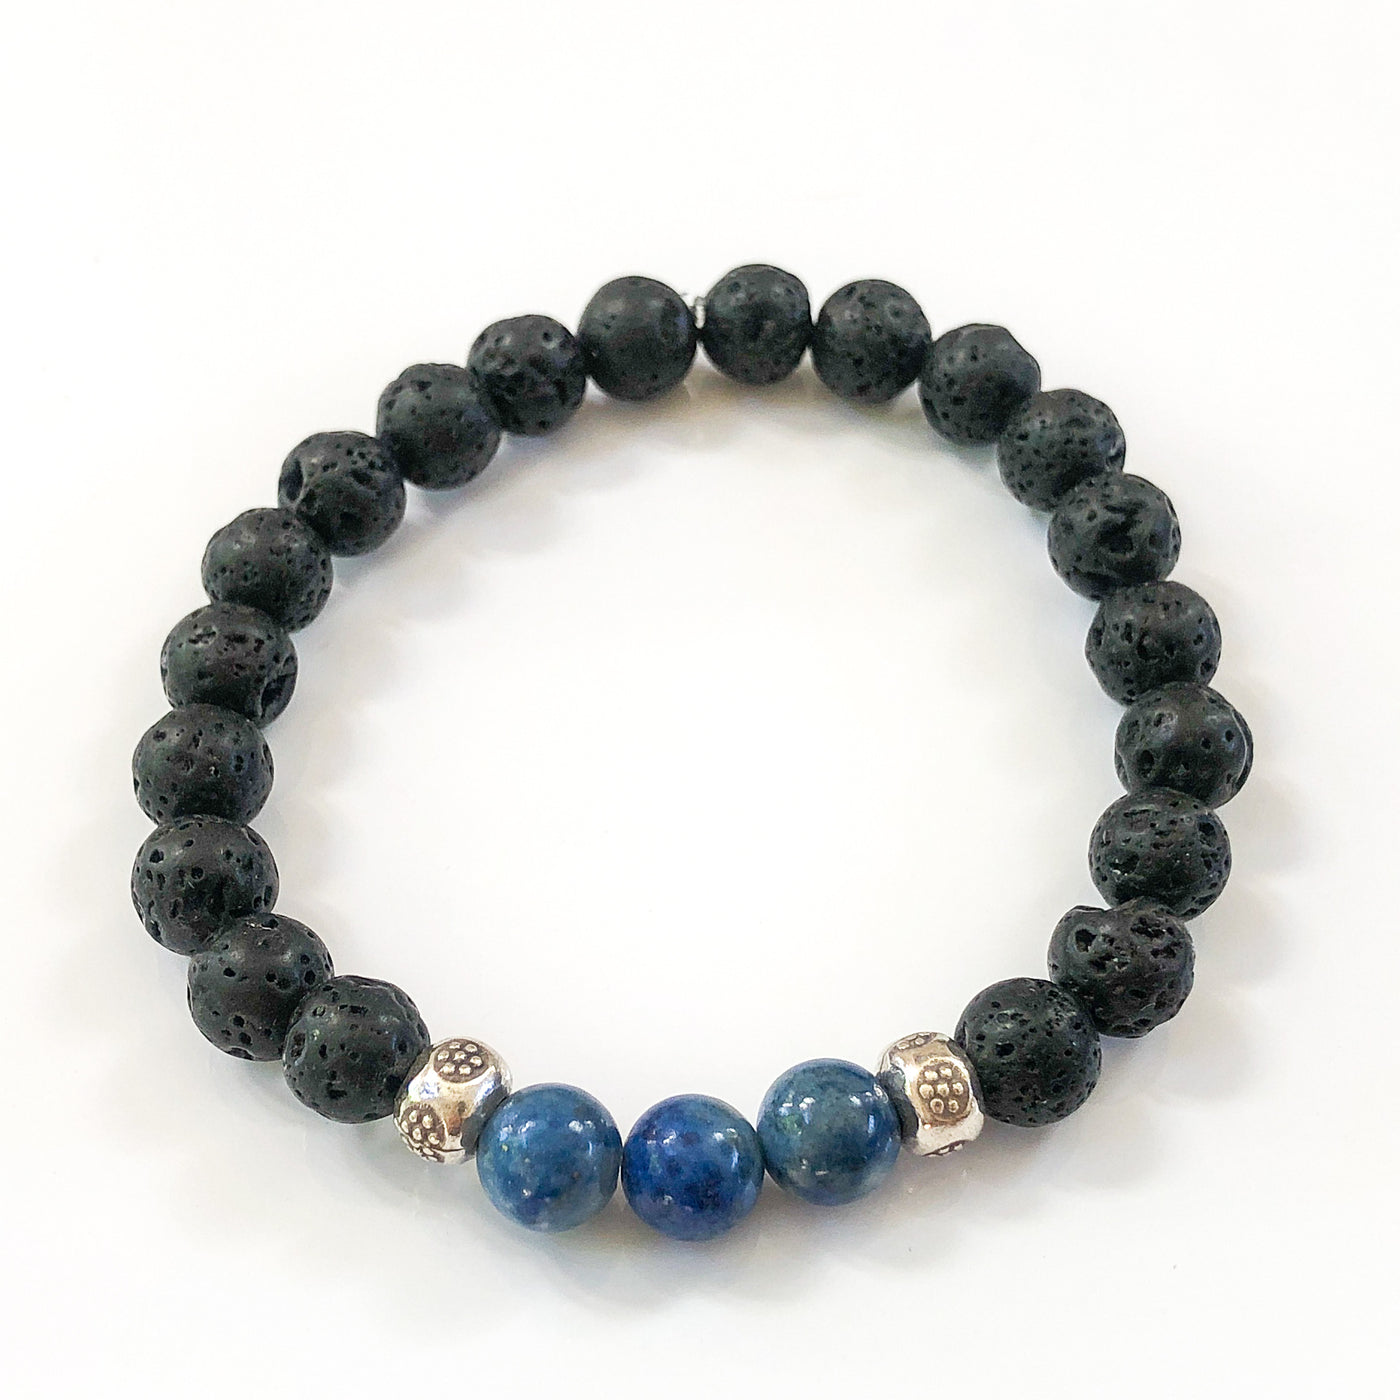 Semi-precious Blue Denim Lapis & Lava Rock Beads in a stylish stretch bracelet to complement your T-shirt & jeans.  Handcrafted in CA.